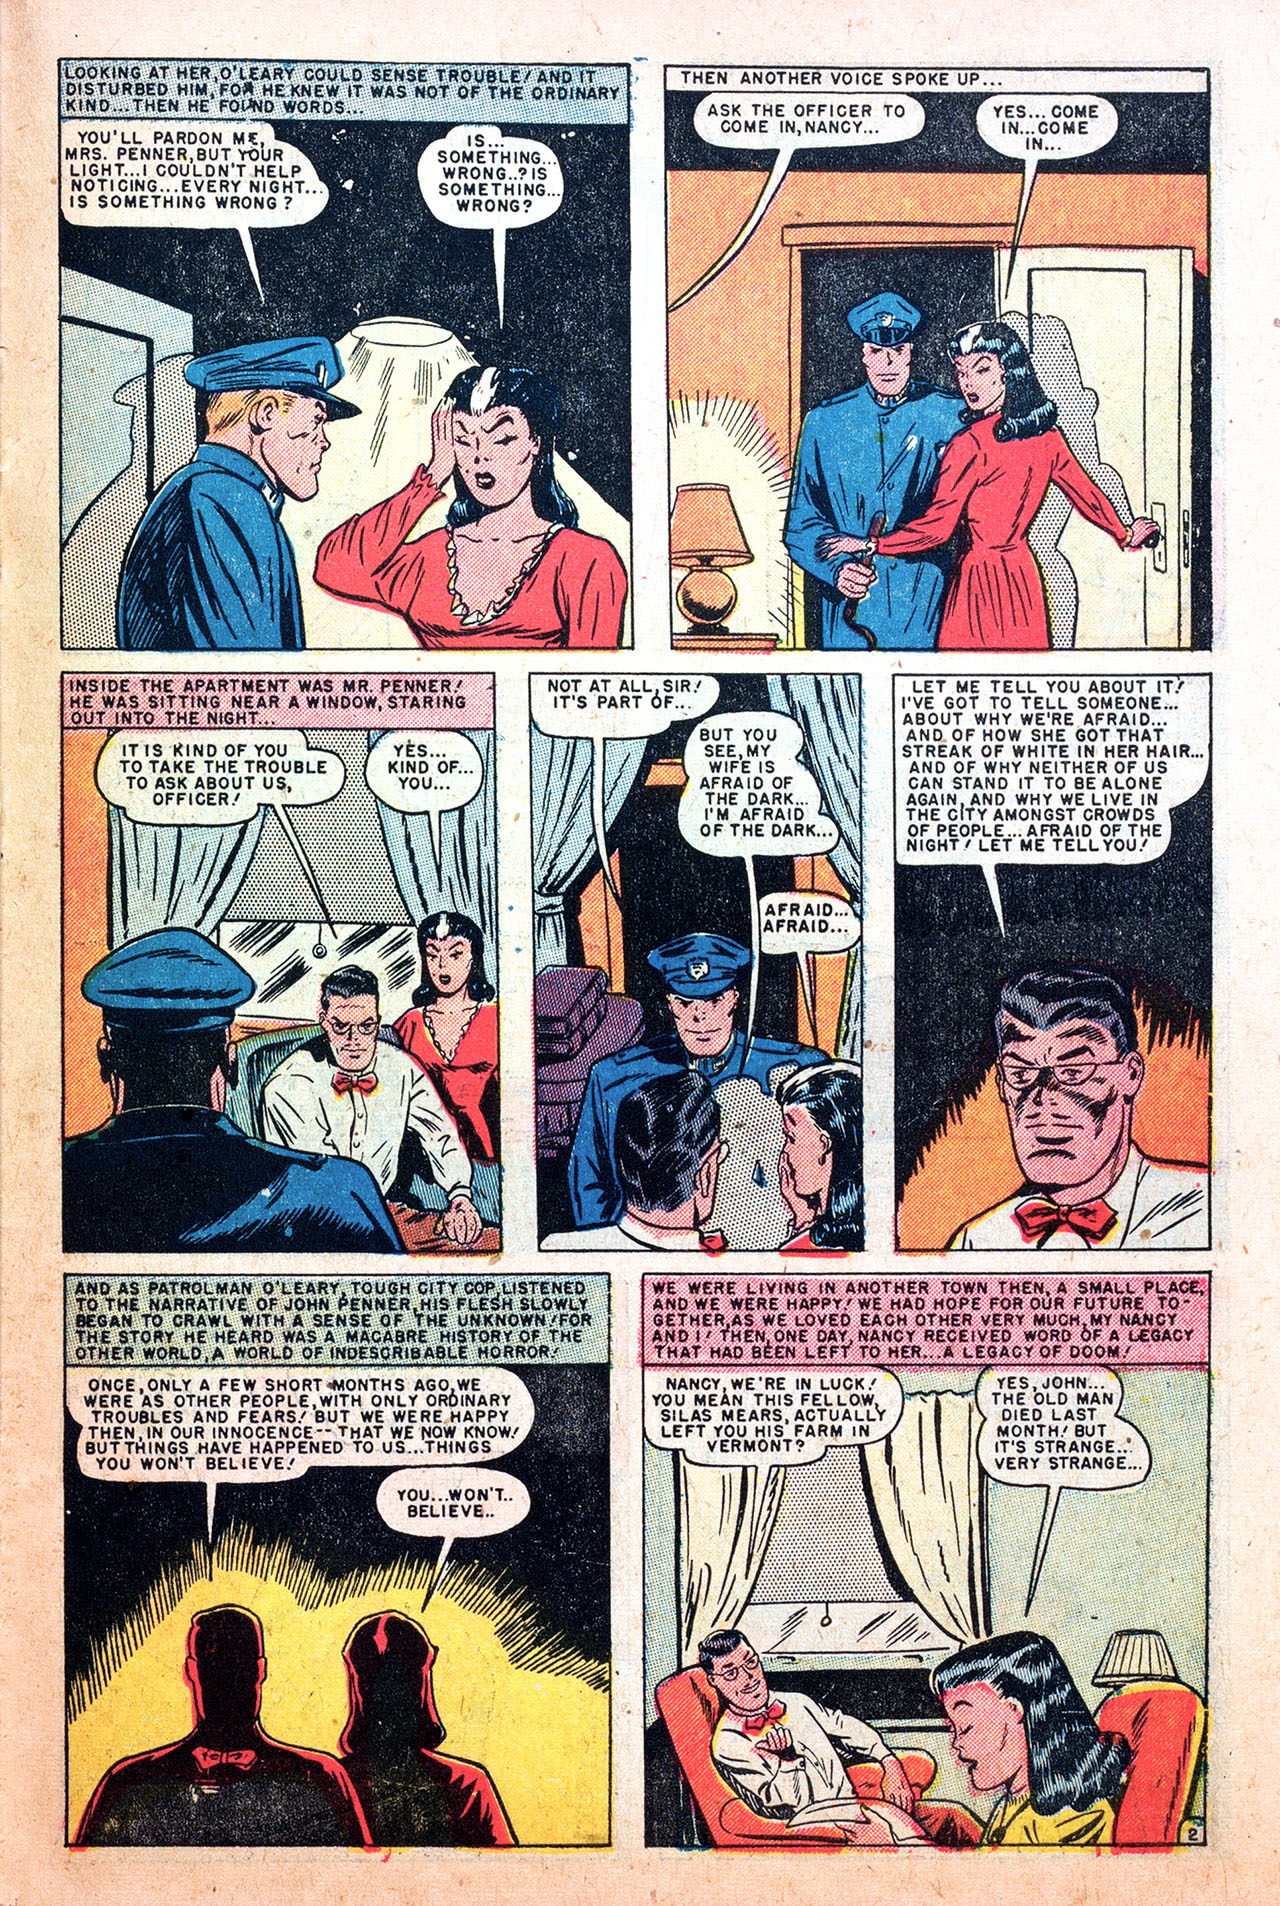 Marvel Tales (1949) 94 Page 26